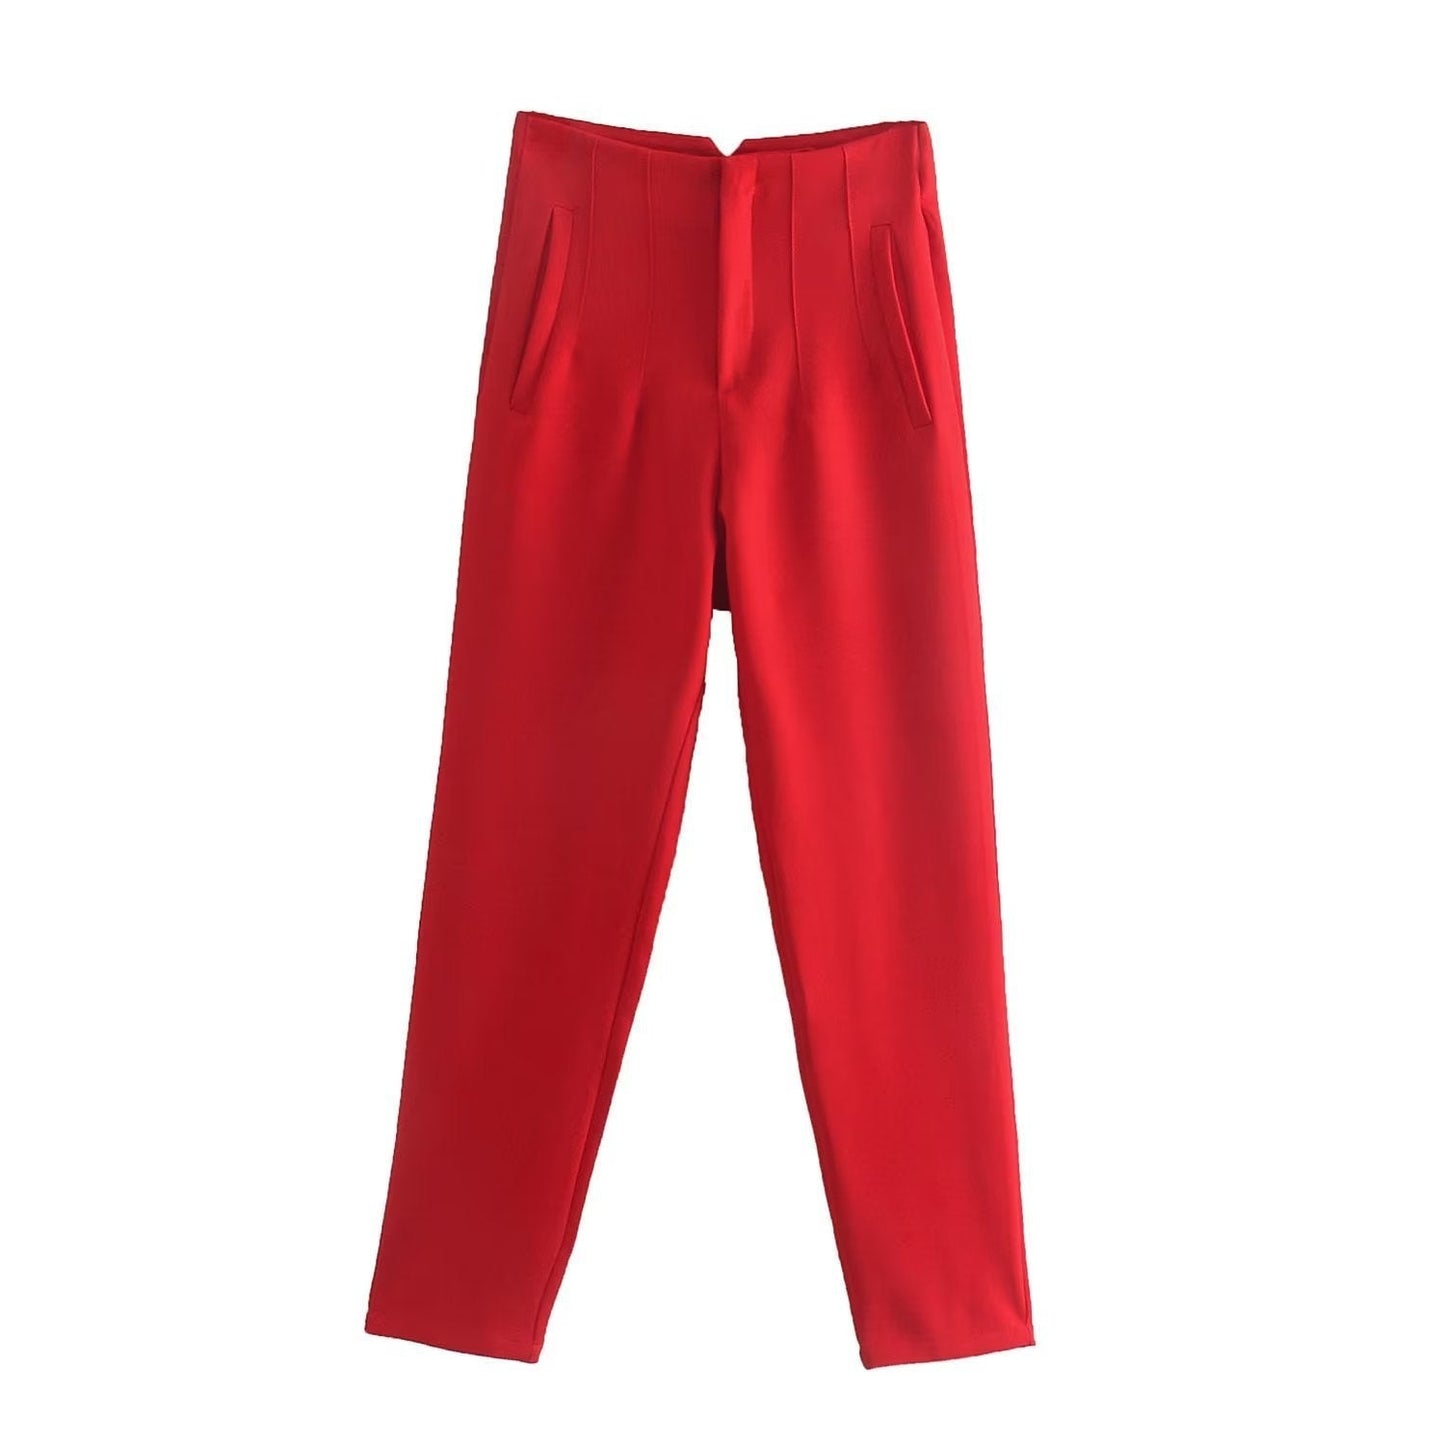 Tailored Pleat High Waist Pants - Buy two and get free shipping! mysite